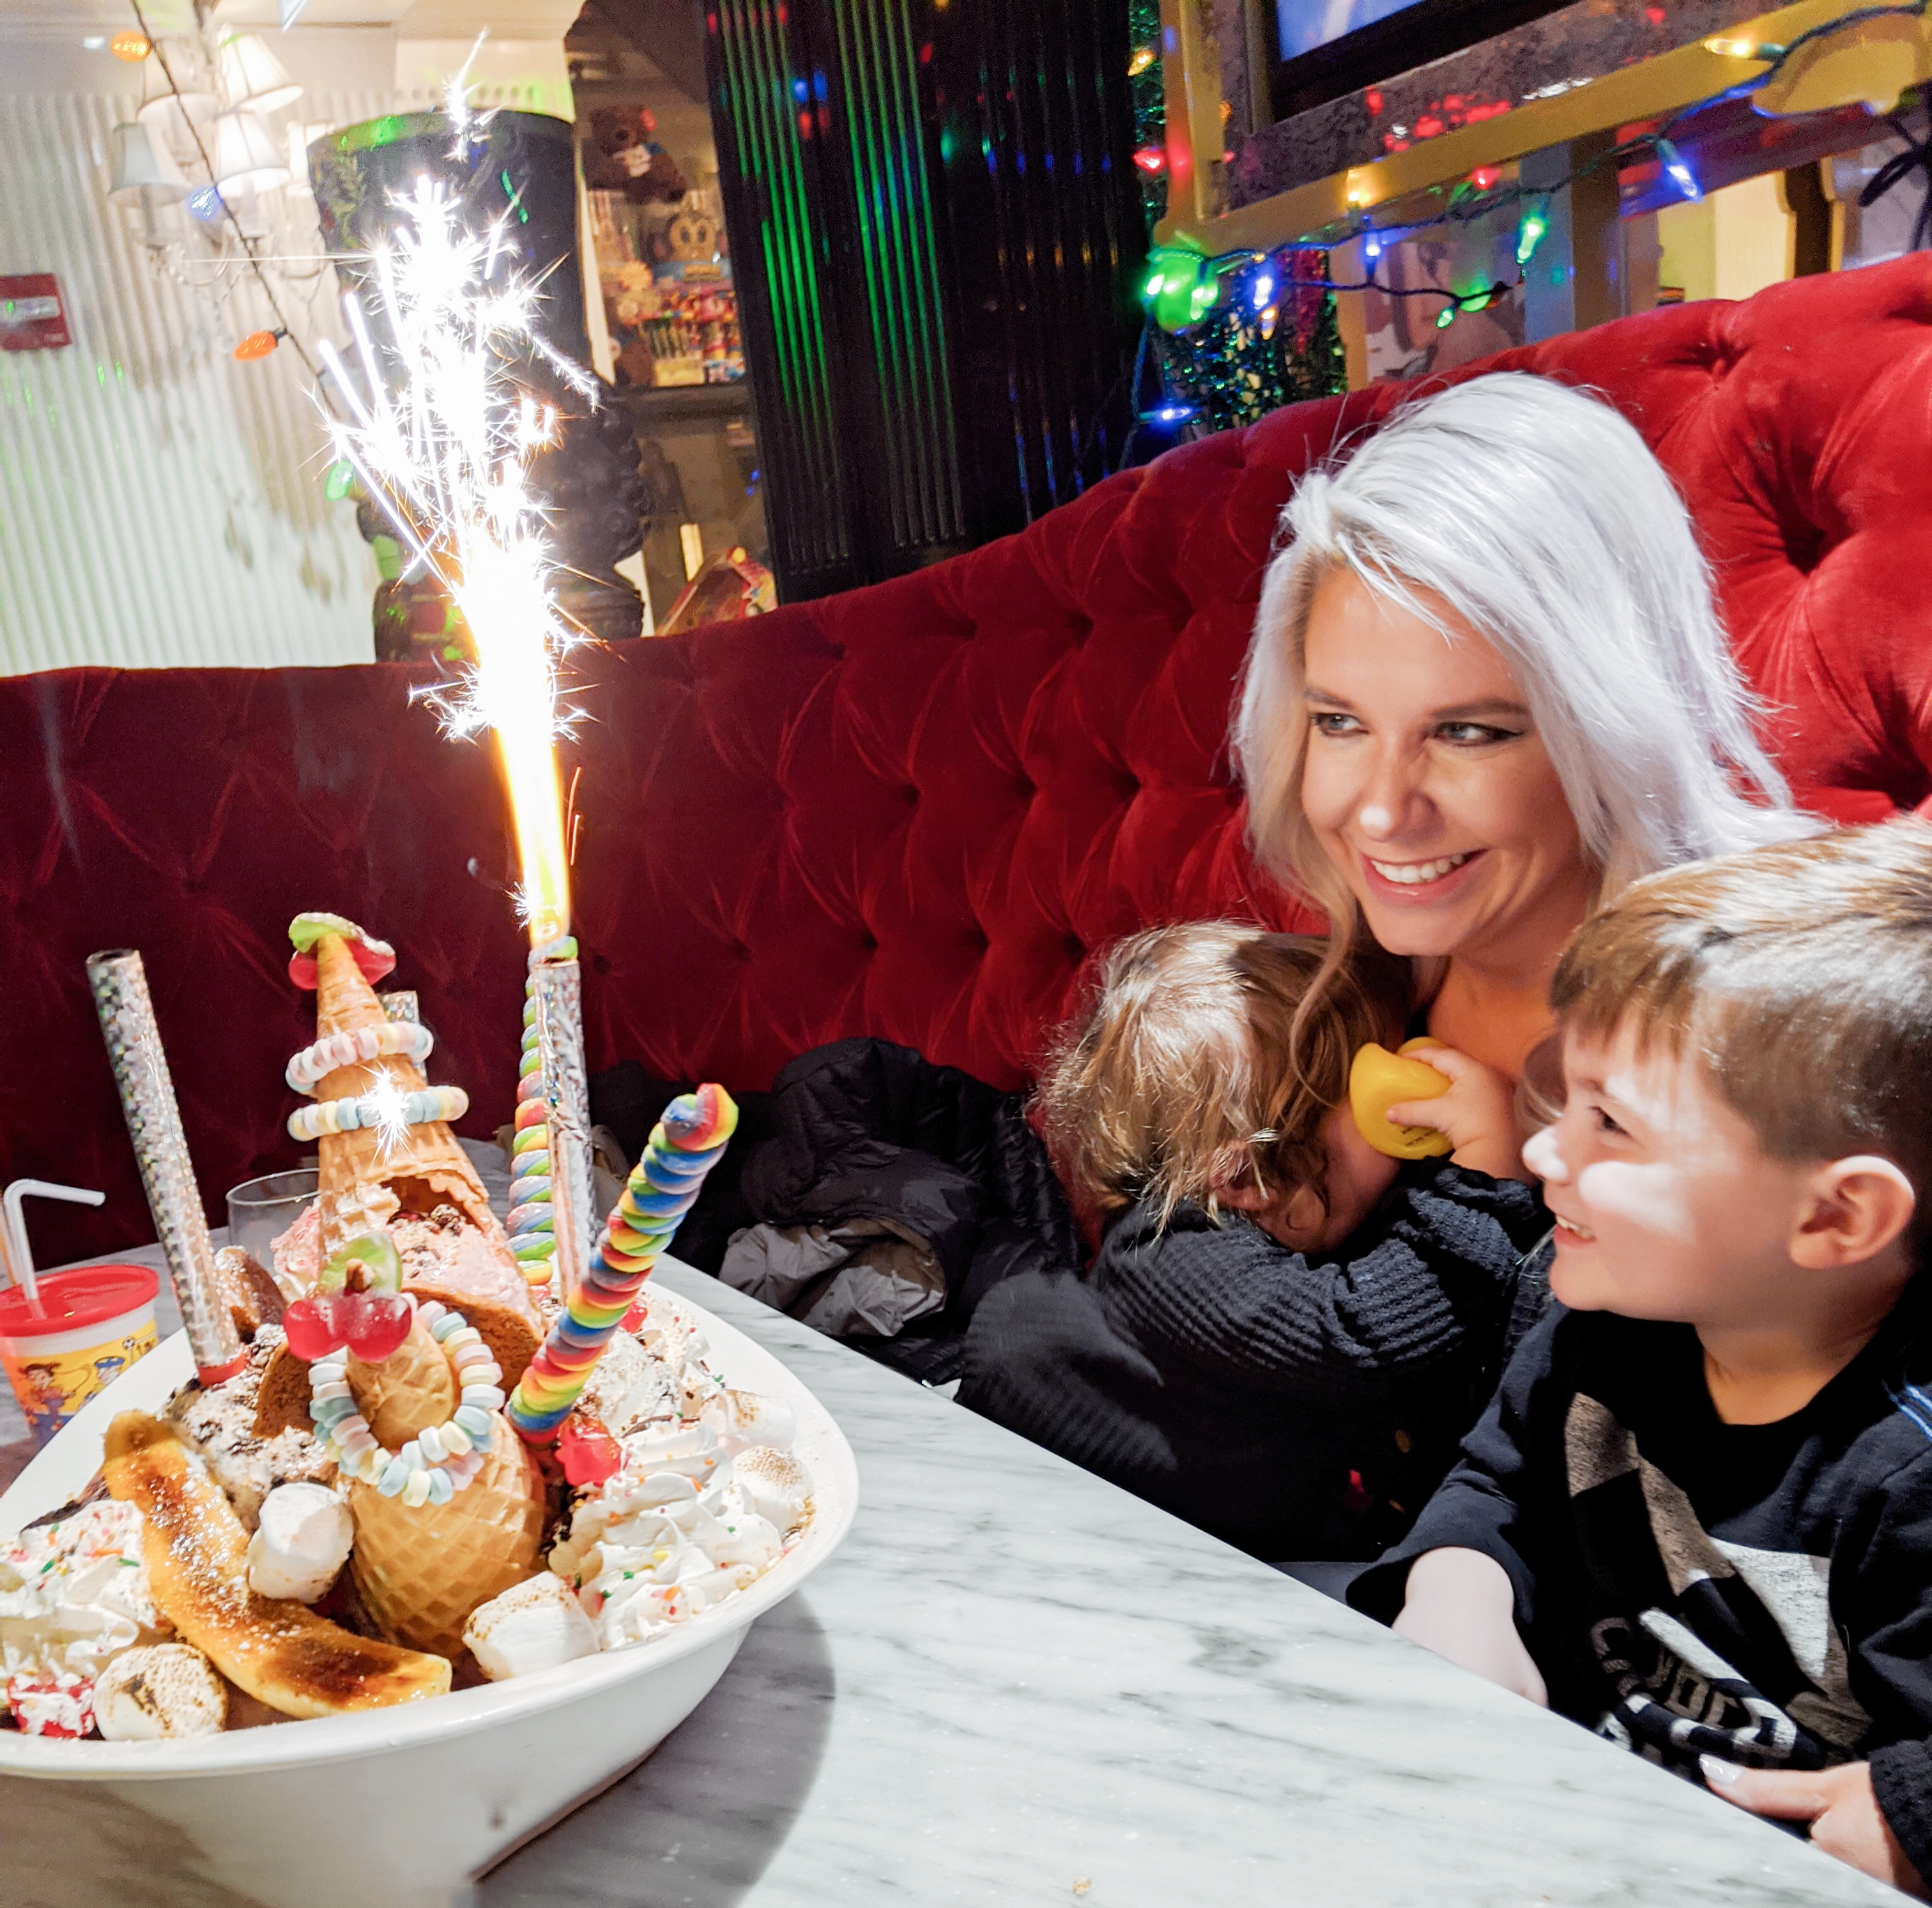 Sugar Factory Chicago - Instagrammable Restaurants in Chicago - If you're looking for the most Instagram worthy places in Chicago, you have to check out Sugar Factory! Their King Kong Sundae is the dessert of a lifetime. #sugarfactory #chicago #choosechicago